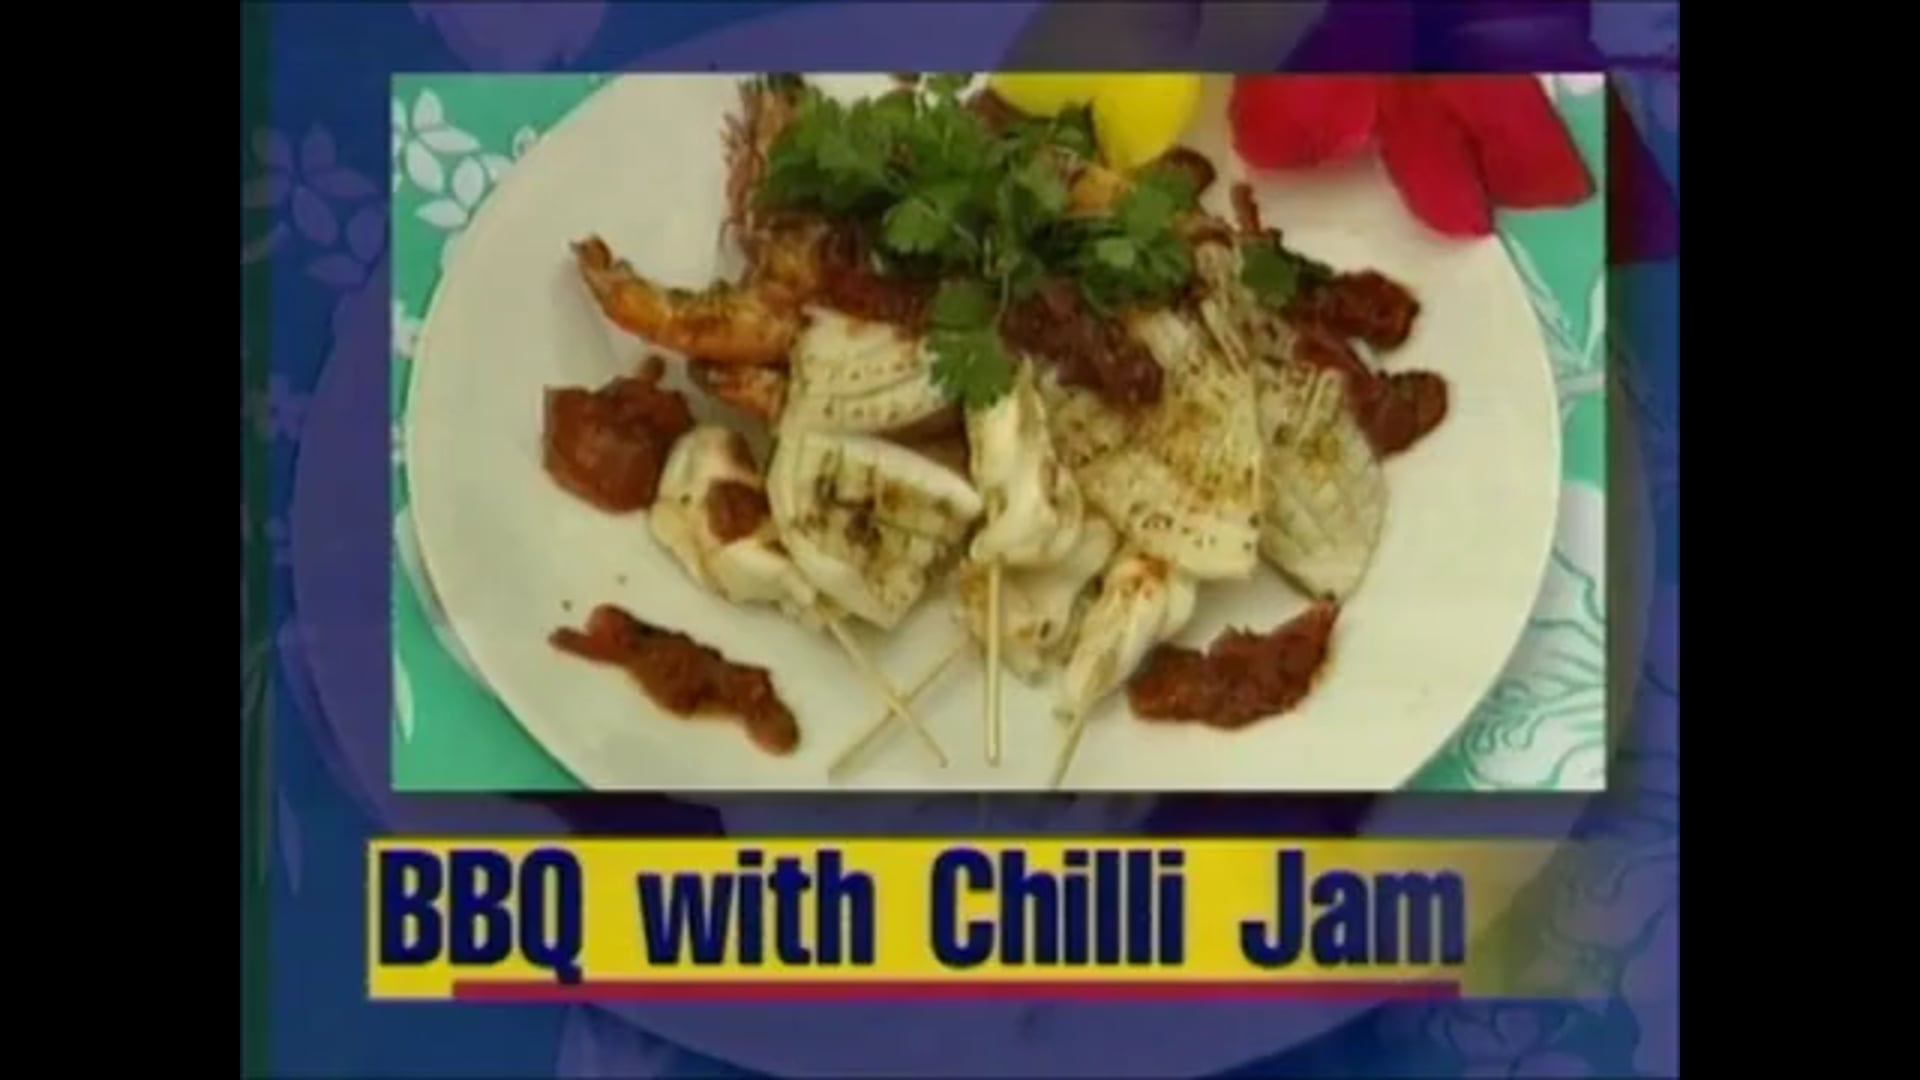 Seafood BBQ with chilli jam